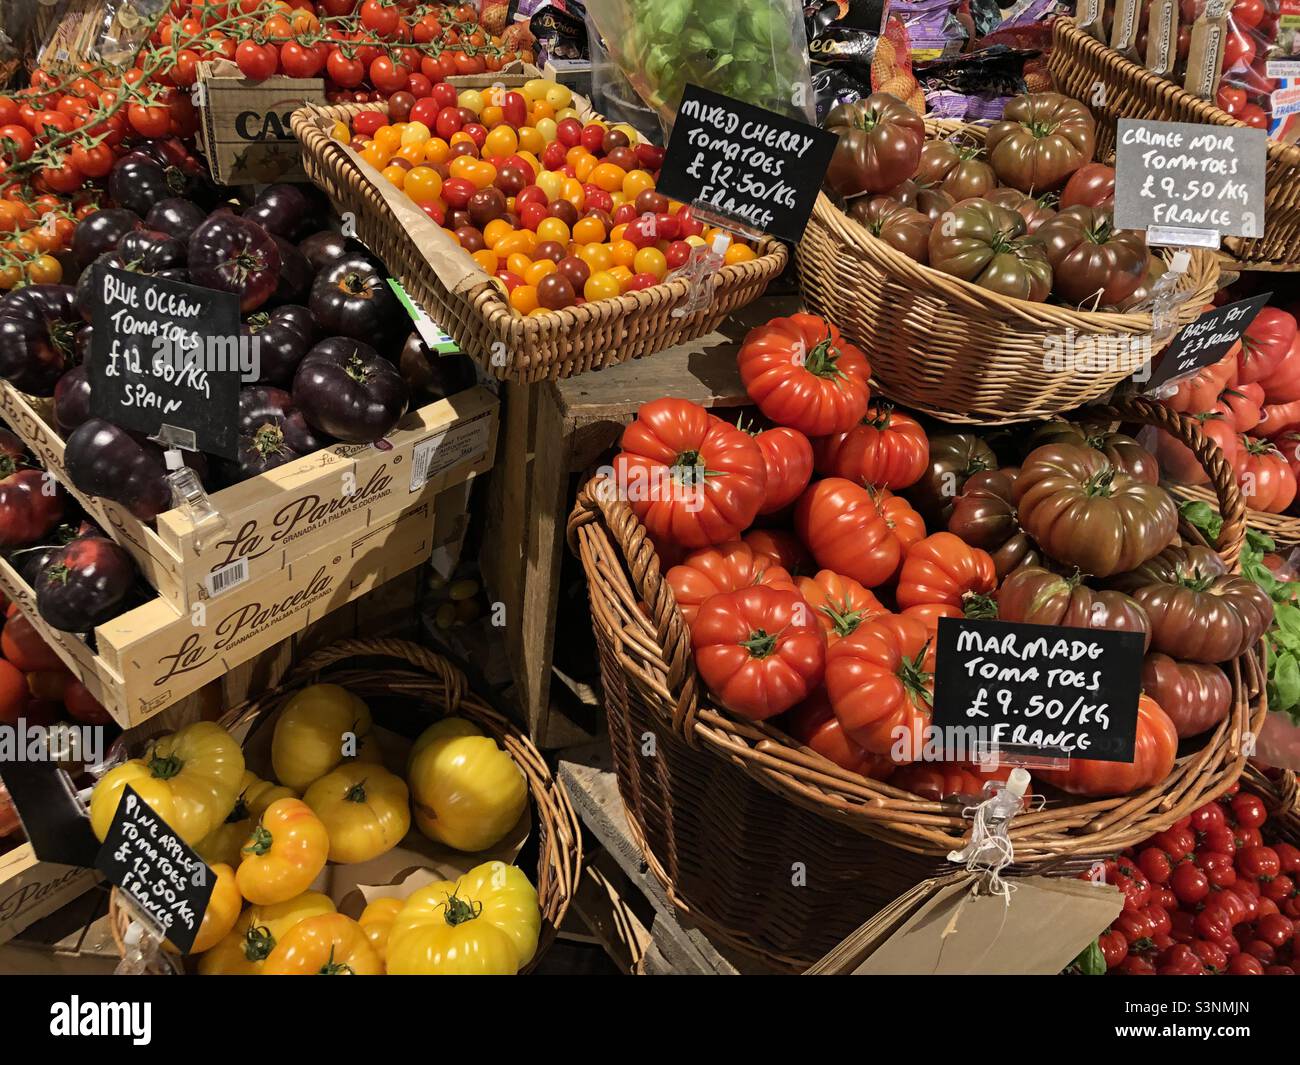 A selection of tomato varieties on display for sale at Bayley & Sage shop in Battersea, London, England. Stock Photo